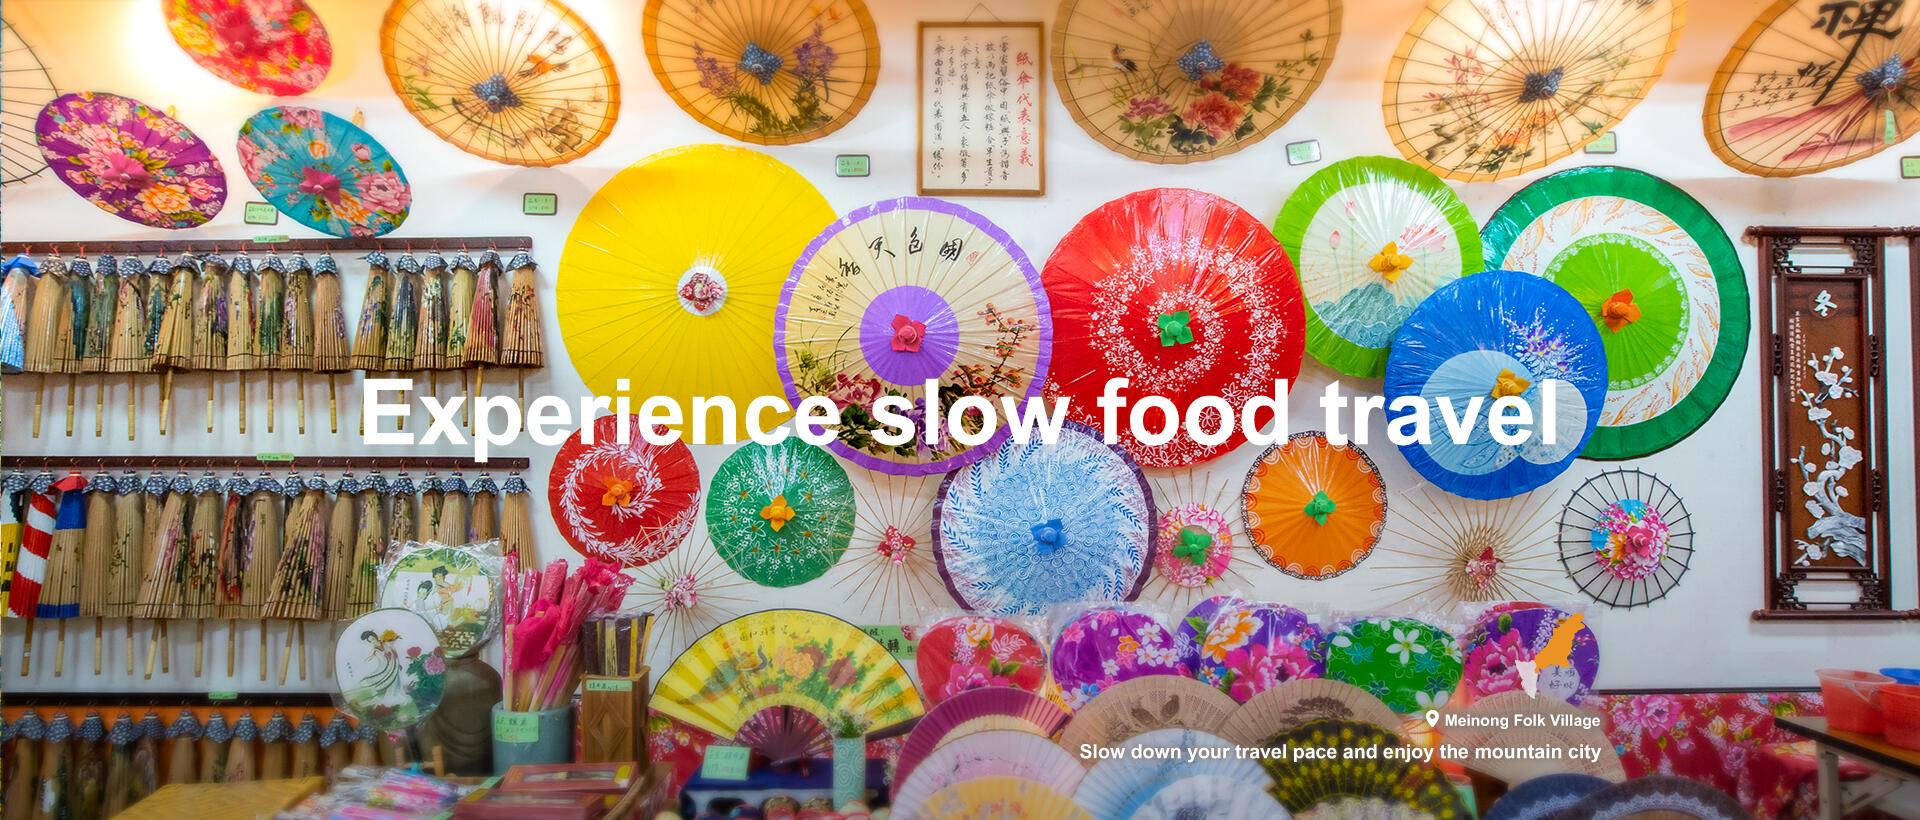 Experience slow food travel